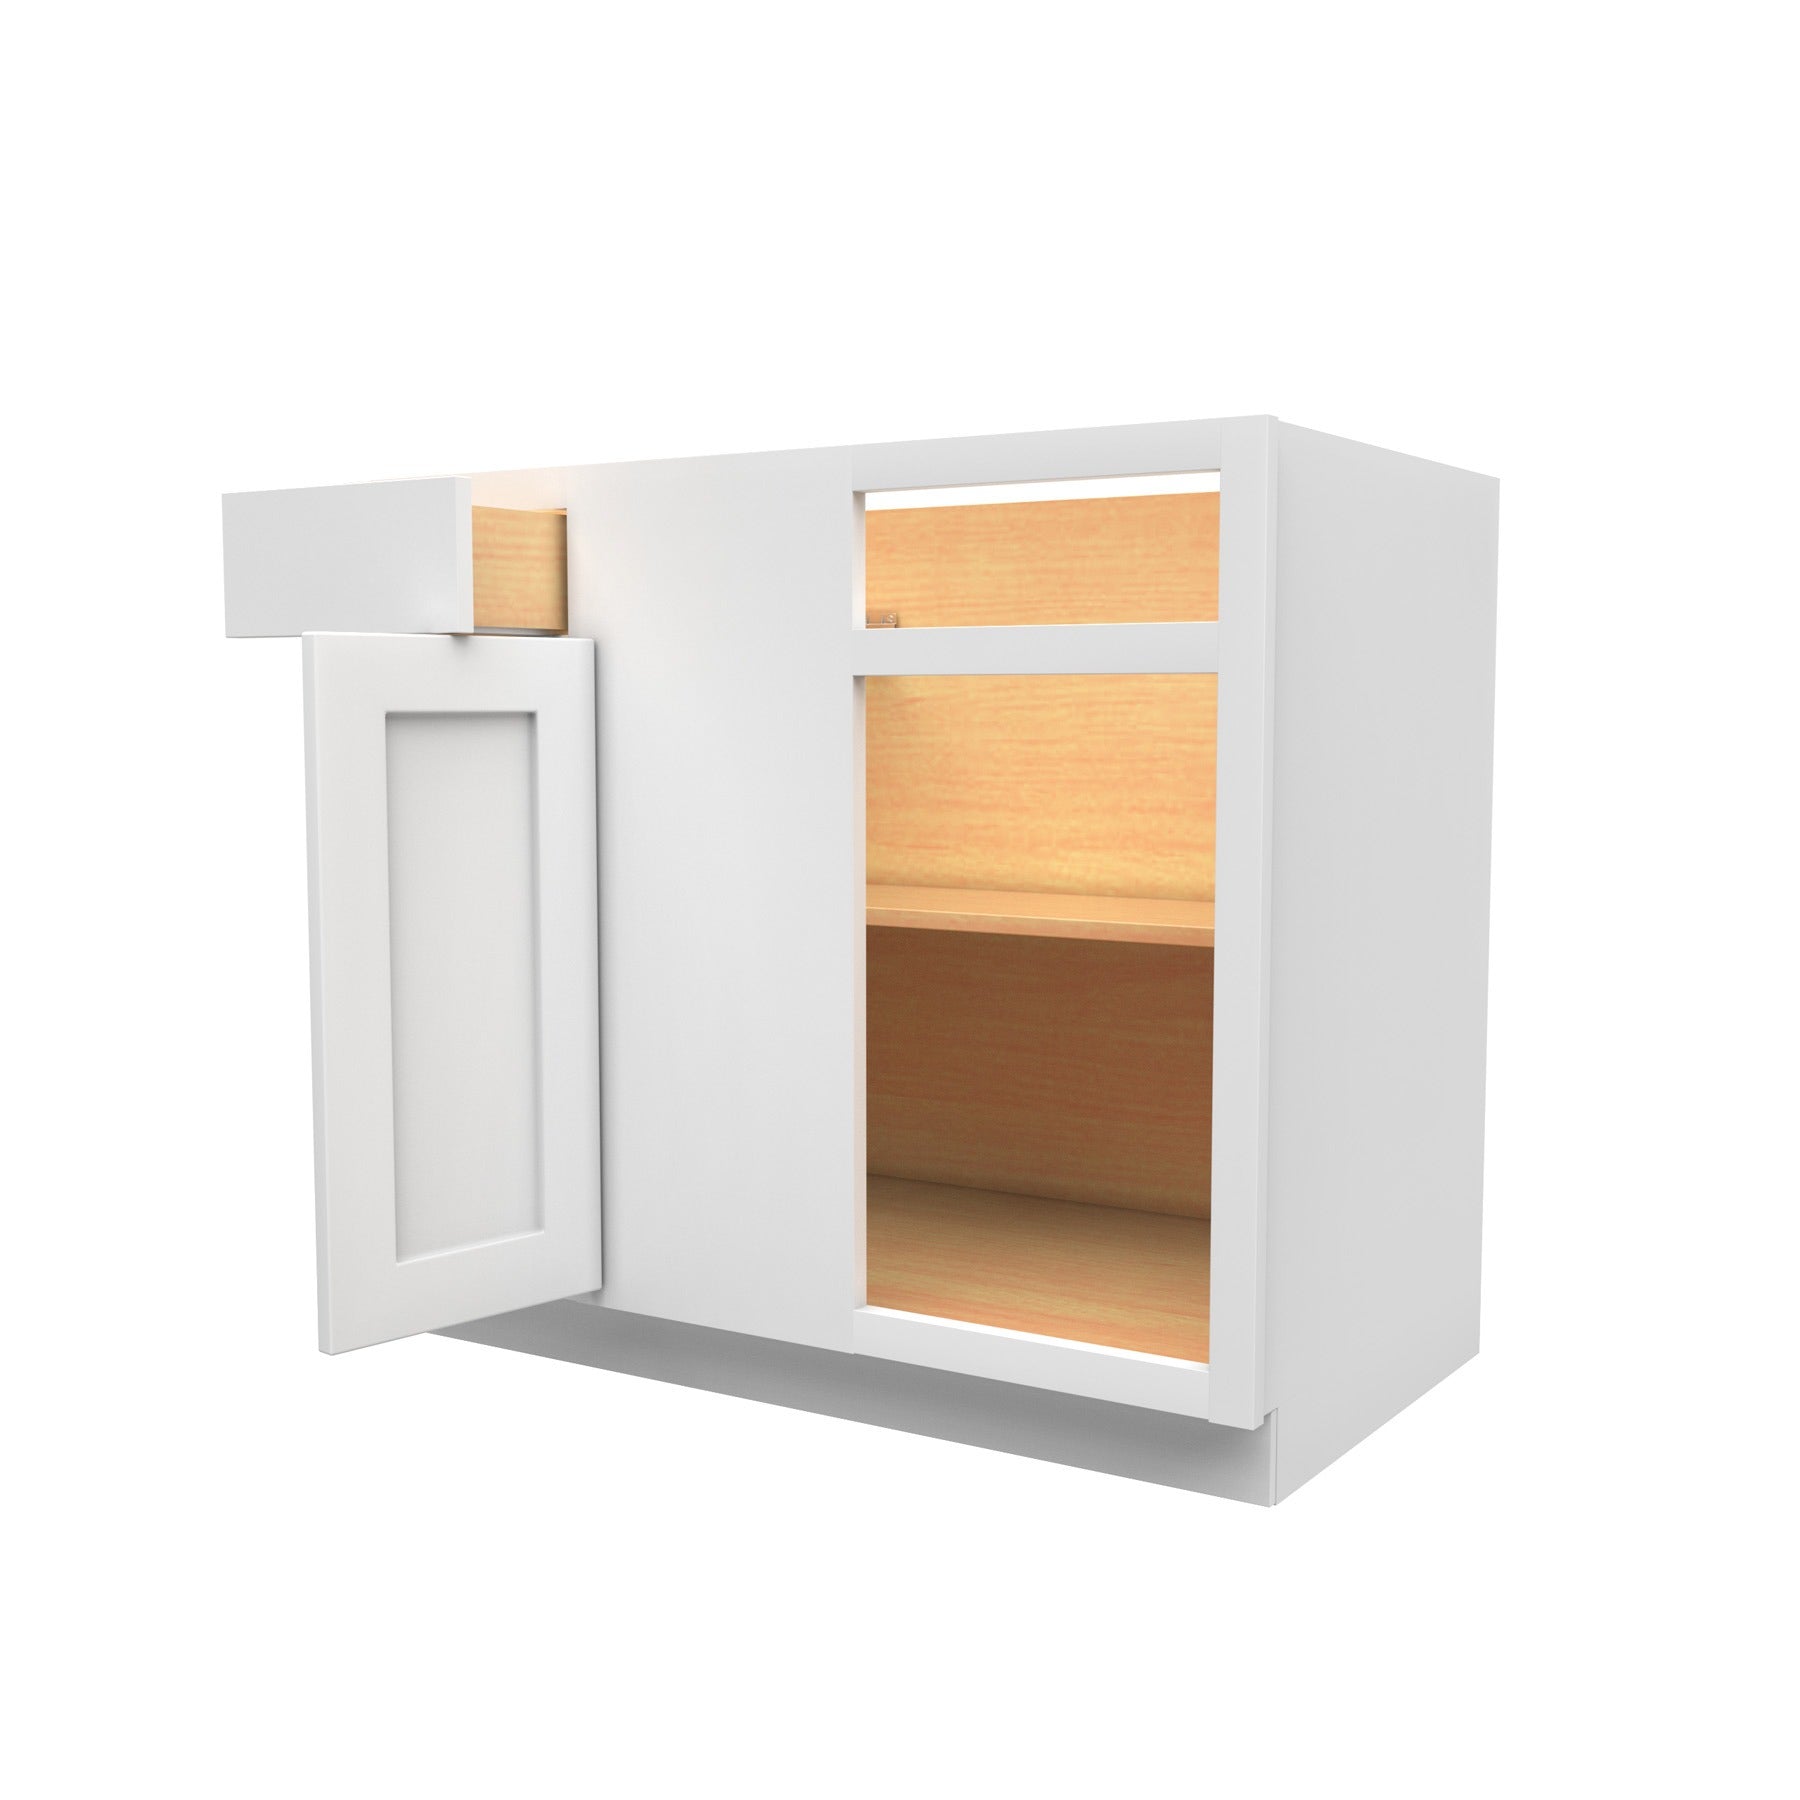 33 Inch Wide Blind Base Cabinet - Luxor White Shaker - Ready To Assemble, 33"W x 34.5"H x 24"D